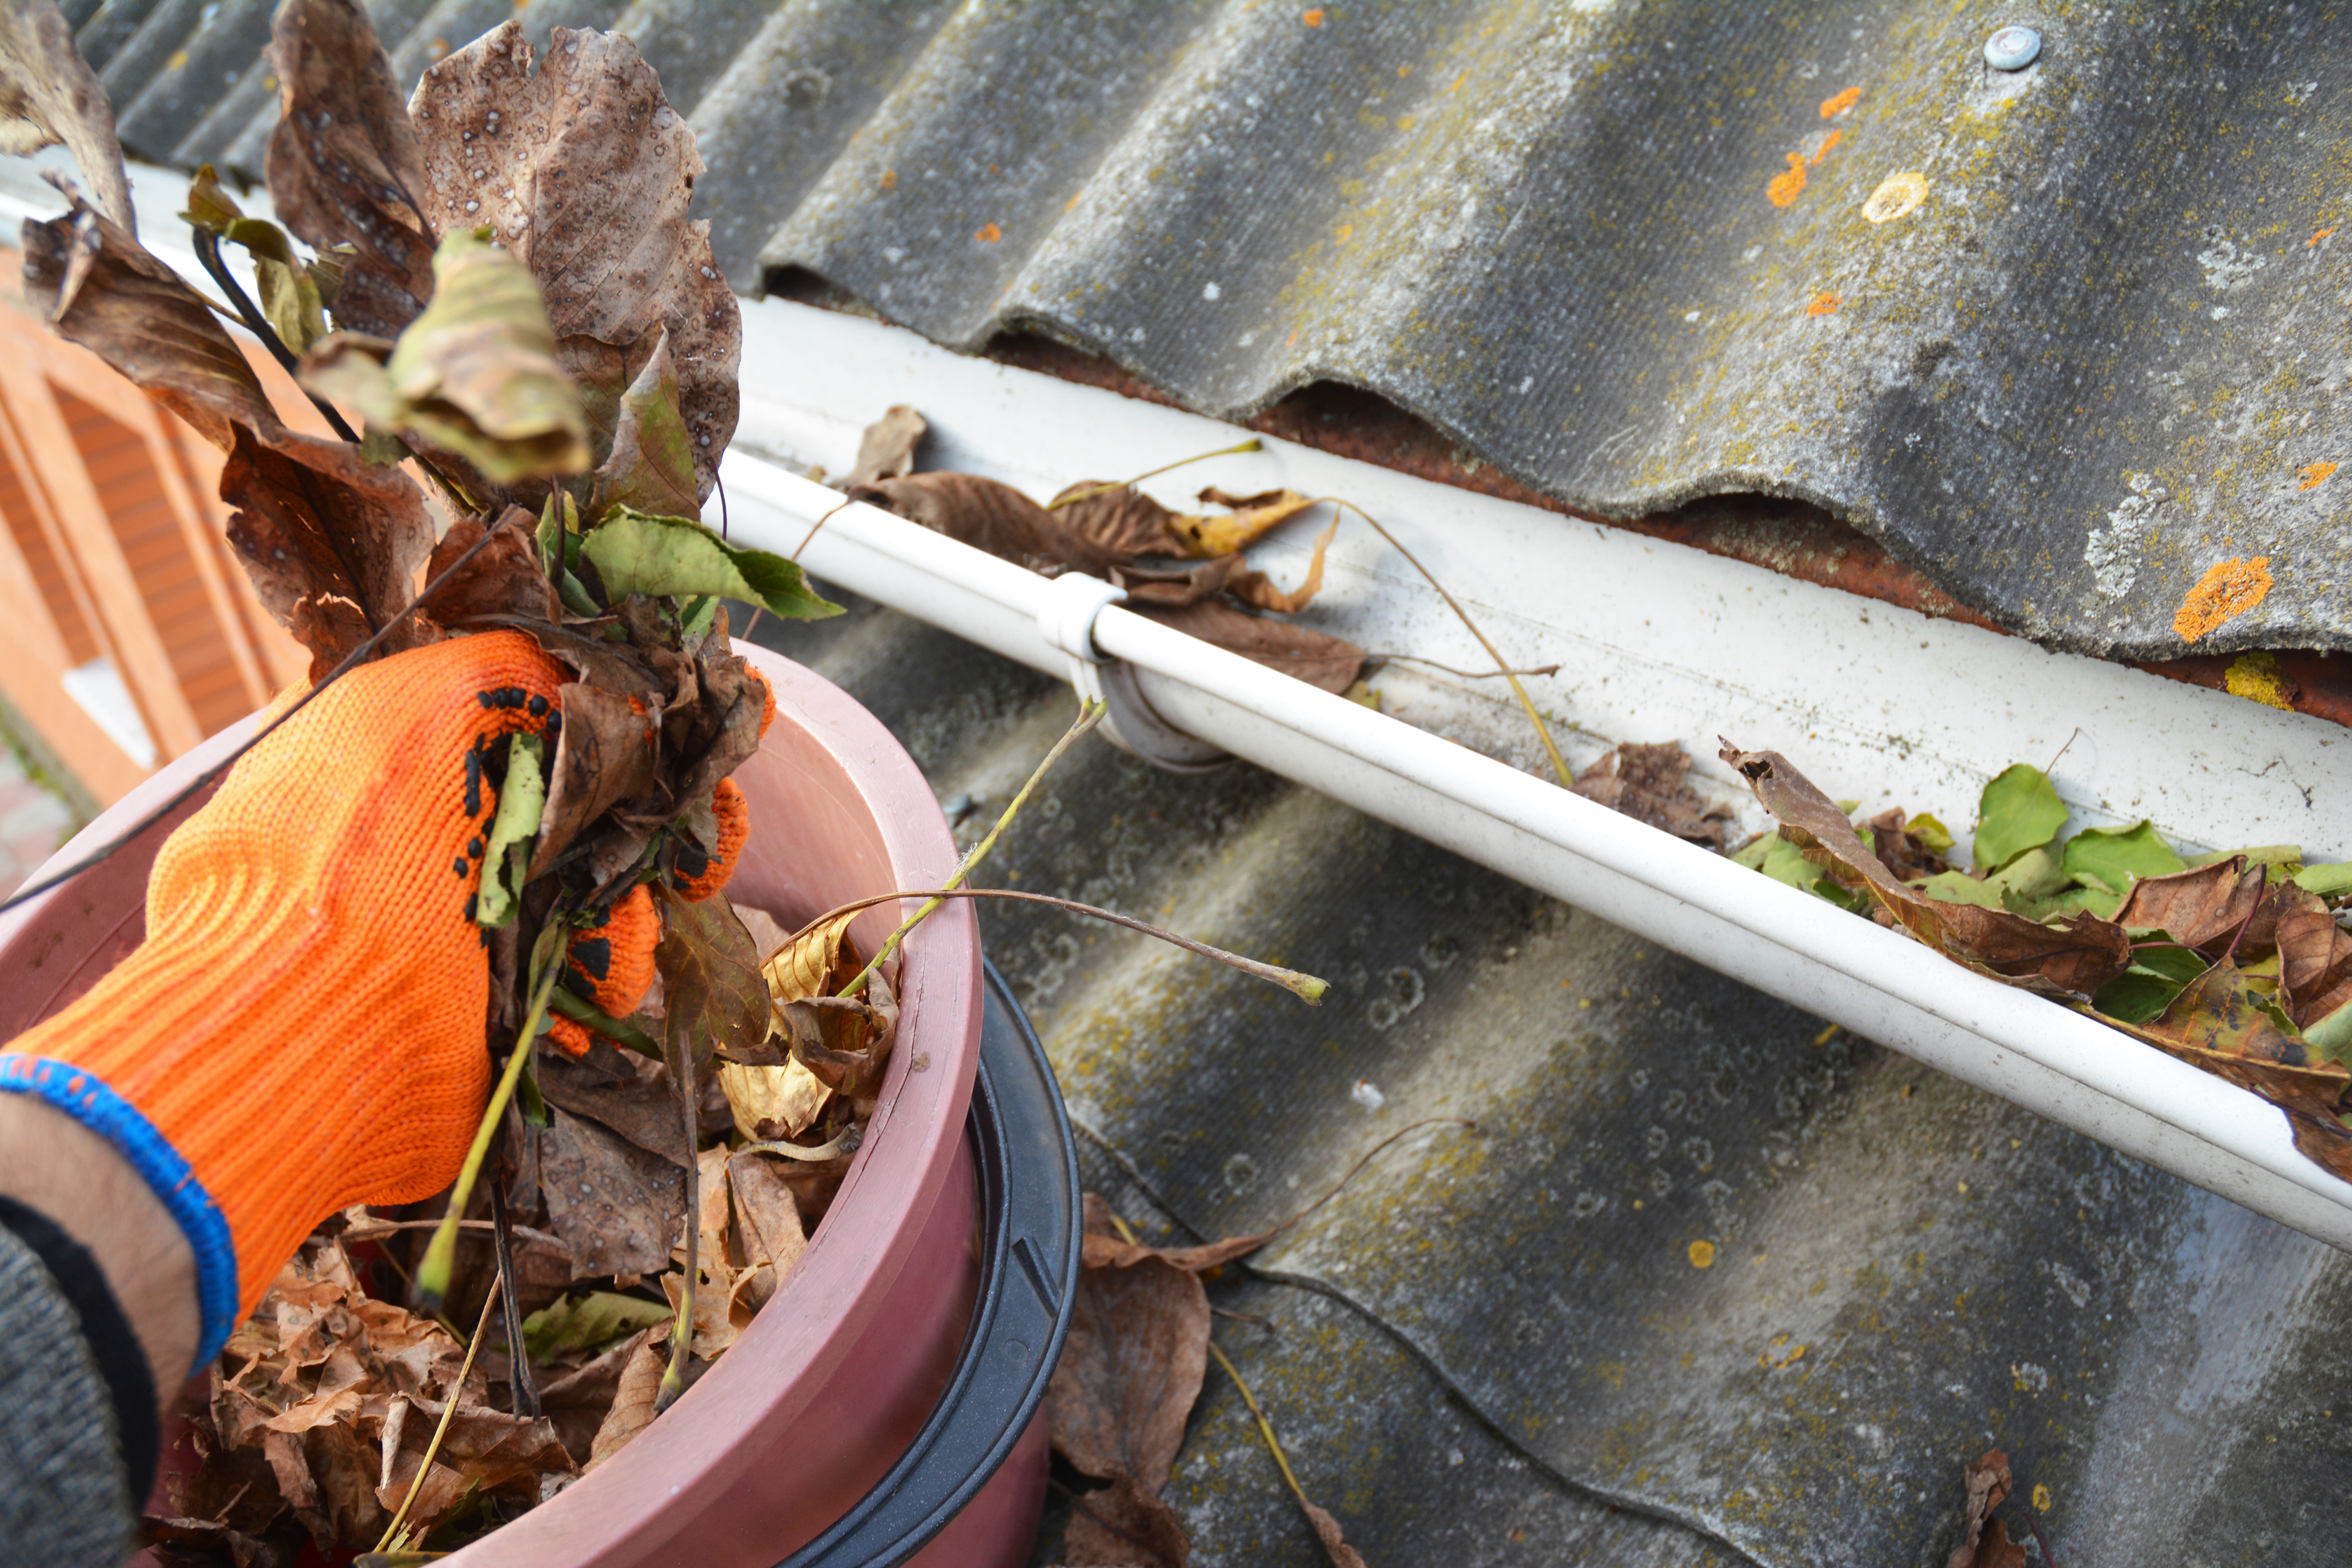 Rain gutters cleaning from leaves. Asbestos roof gutter cleaning.